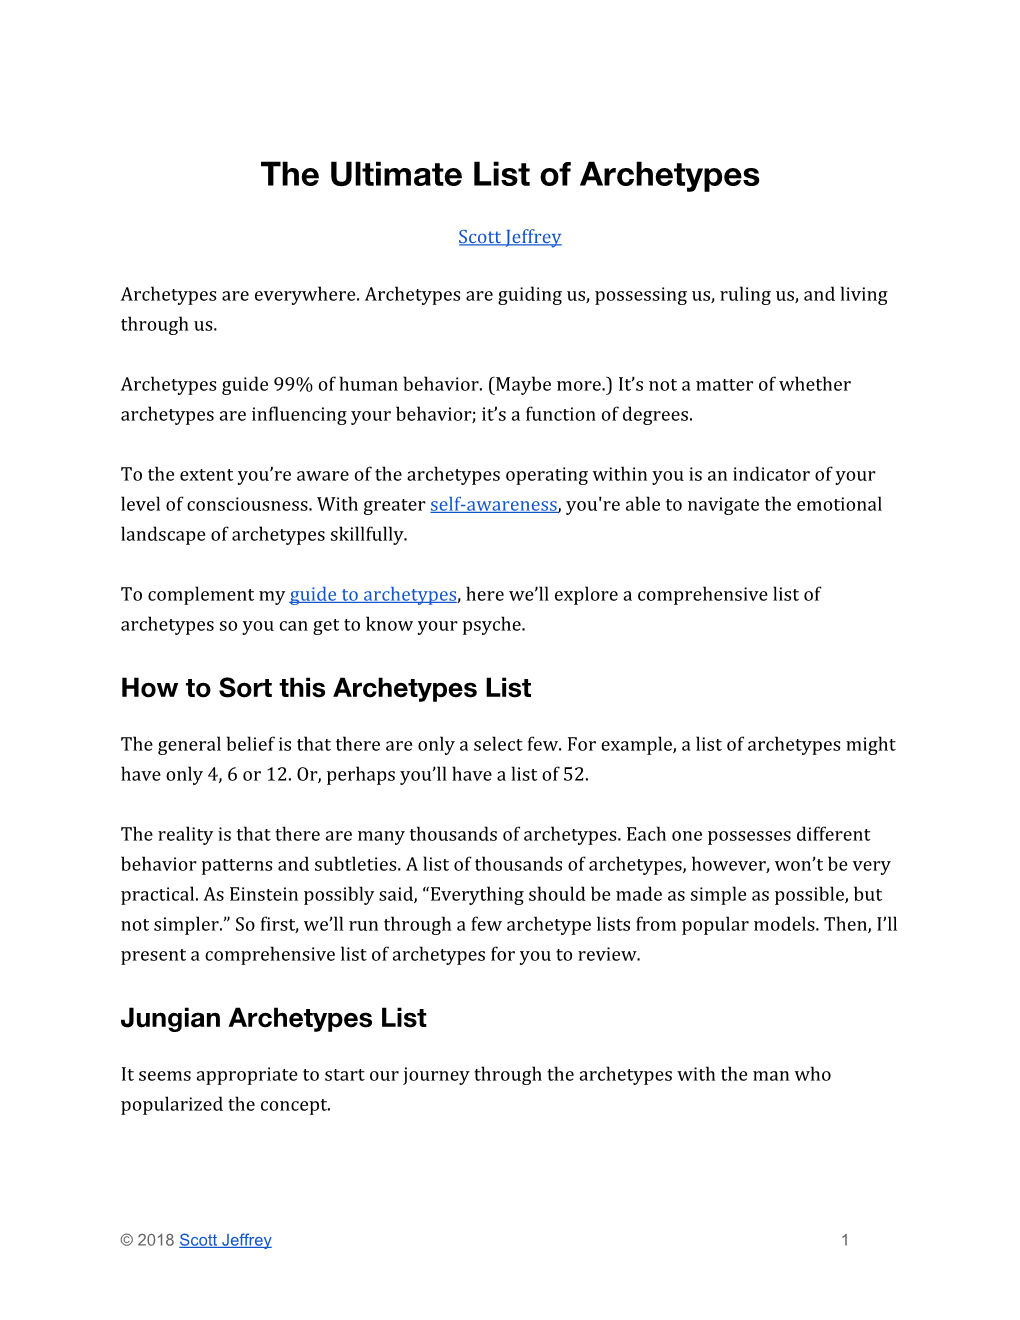 The Ultimate List of Archetypes